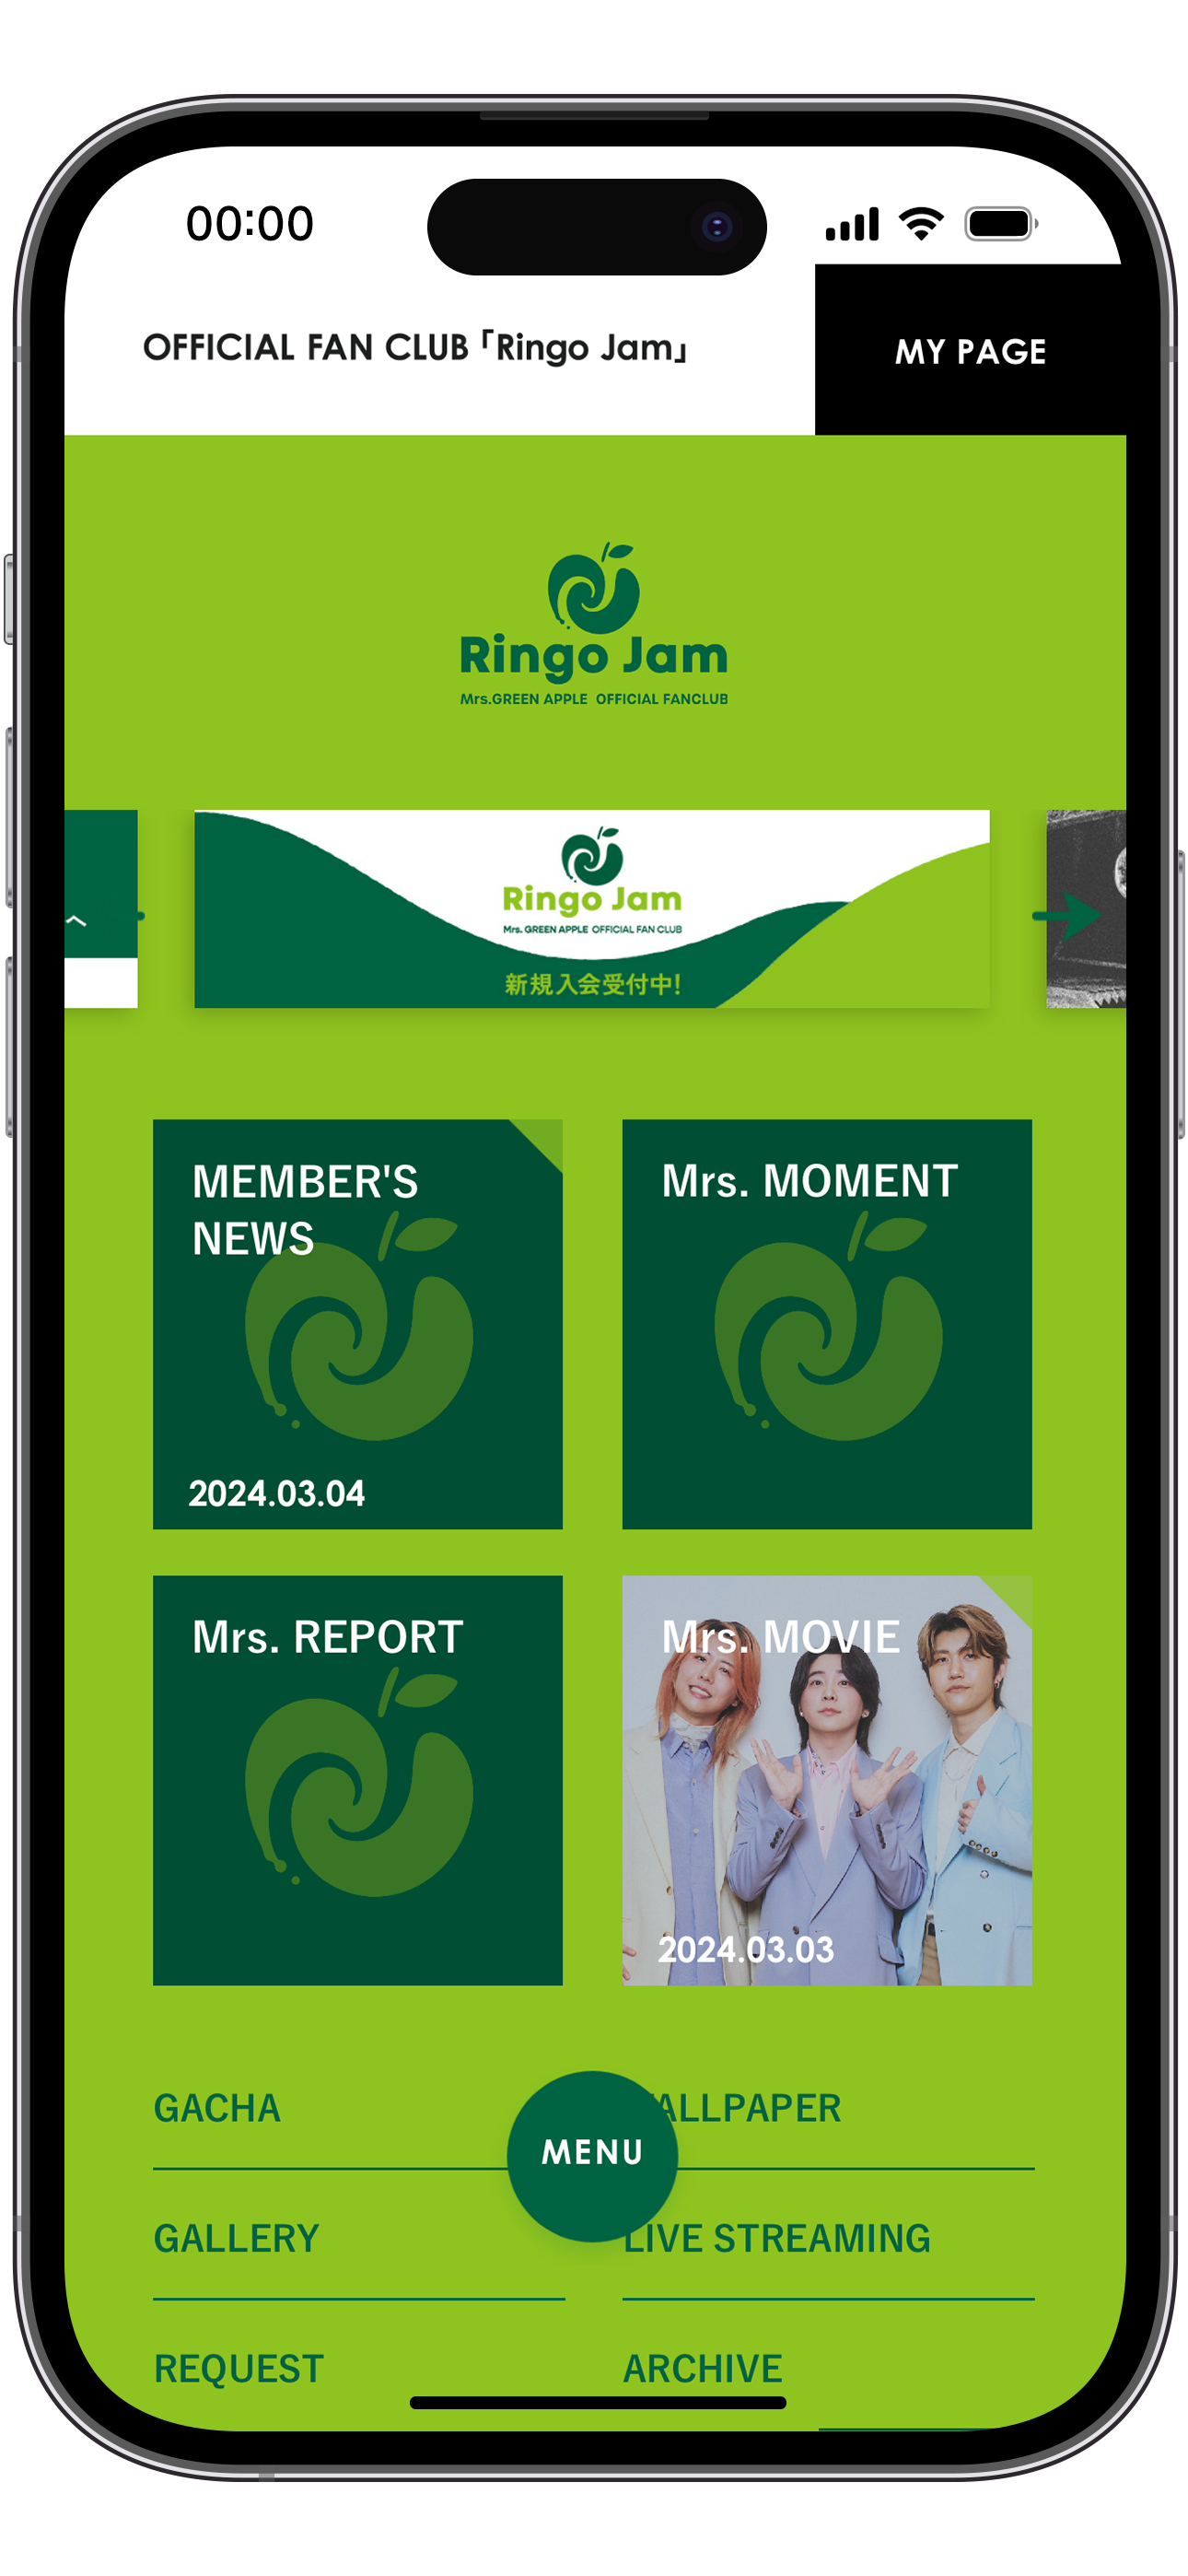 Mrs. GREEN APPLE content is now easier to view!